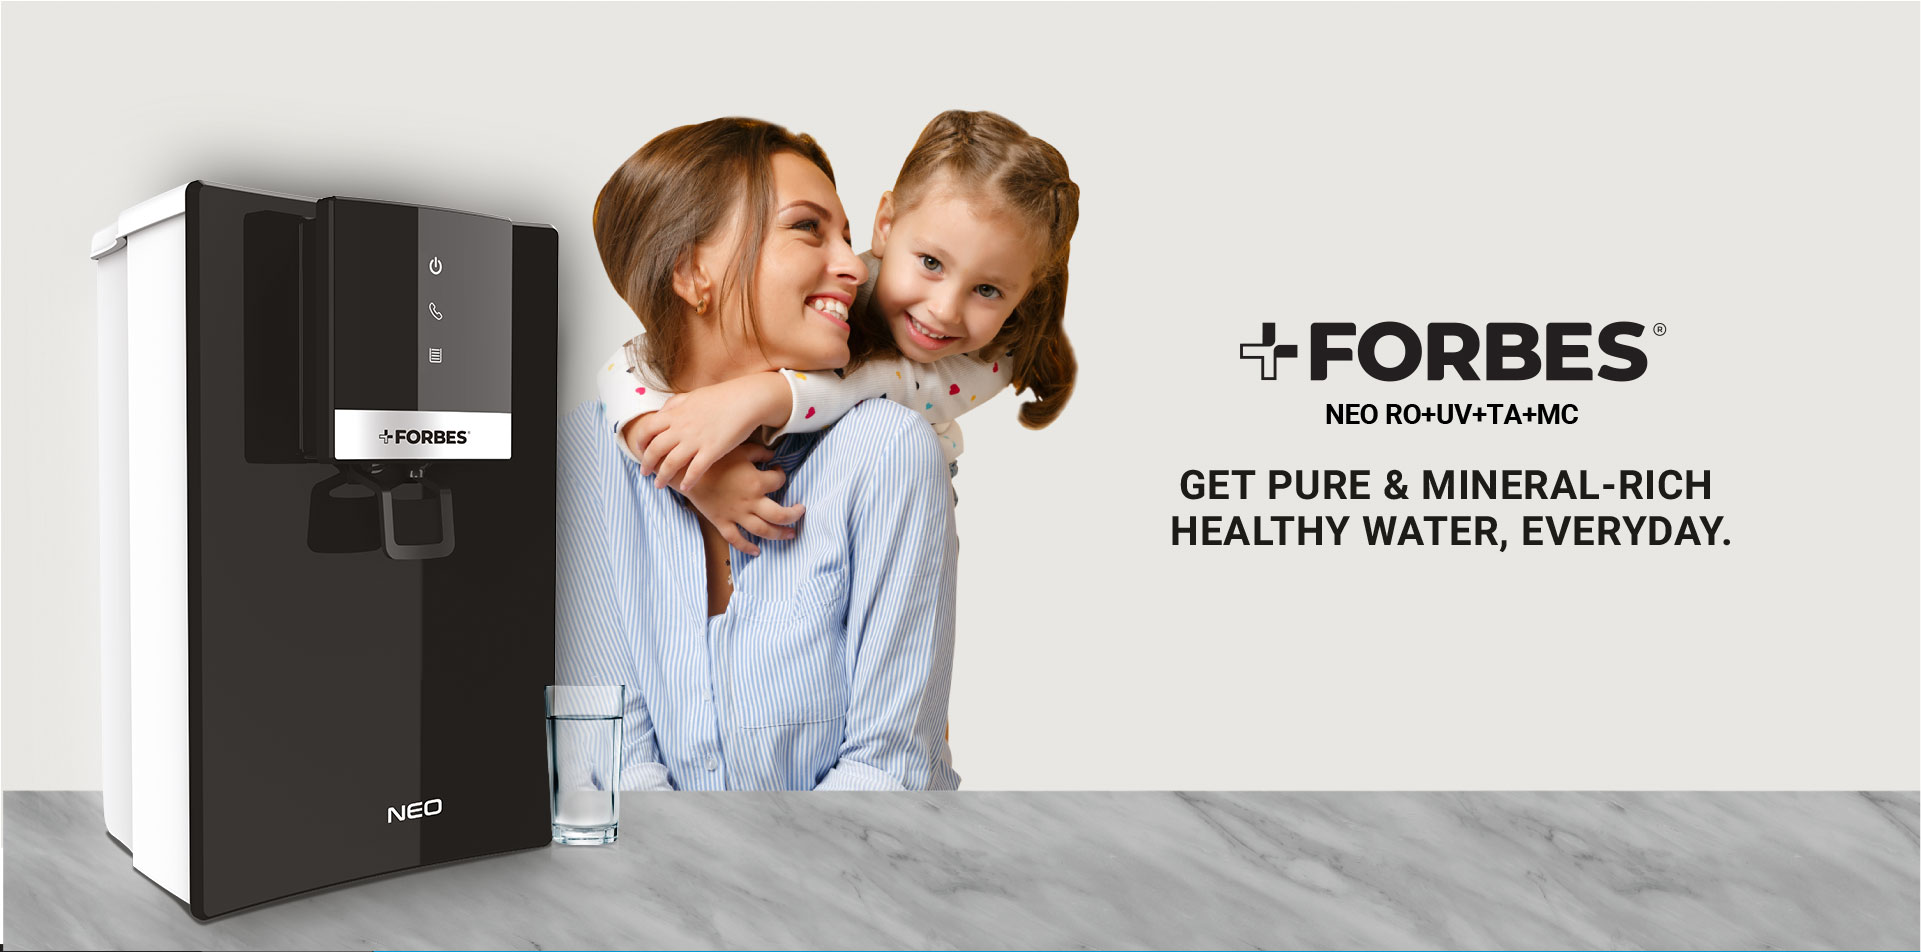 FORBES NEO RO+UV+TA+MC GET PURE & MINERAL-RICH HEALTHY WATER, EVERYDAY.